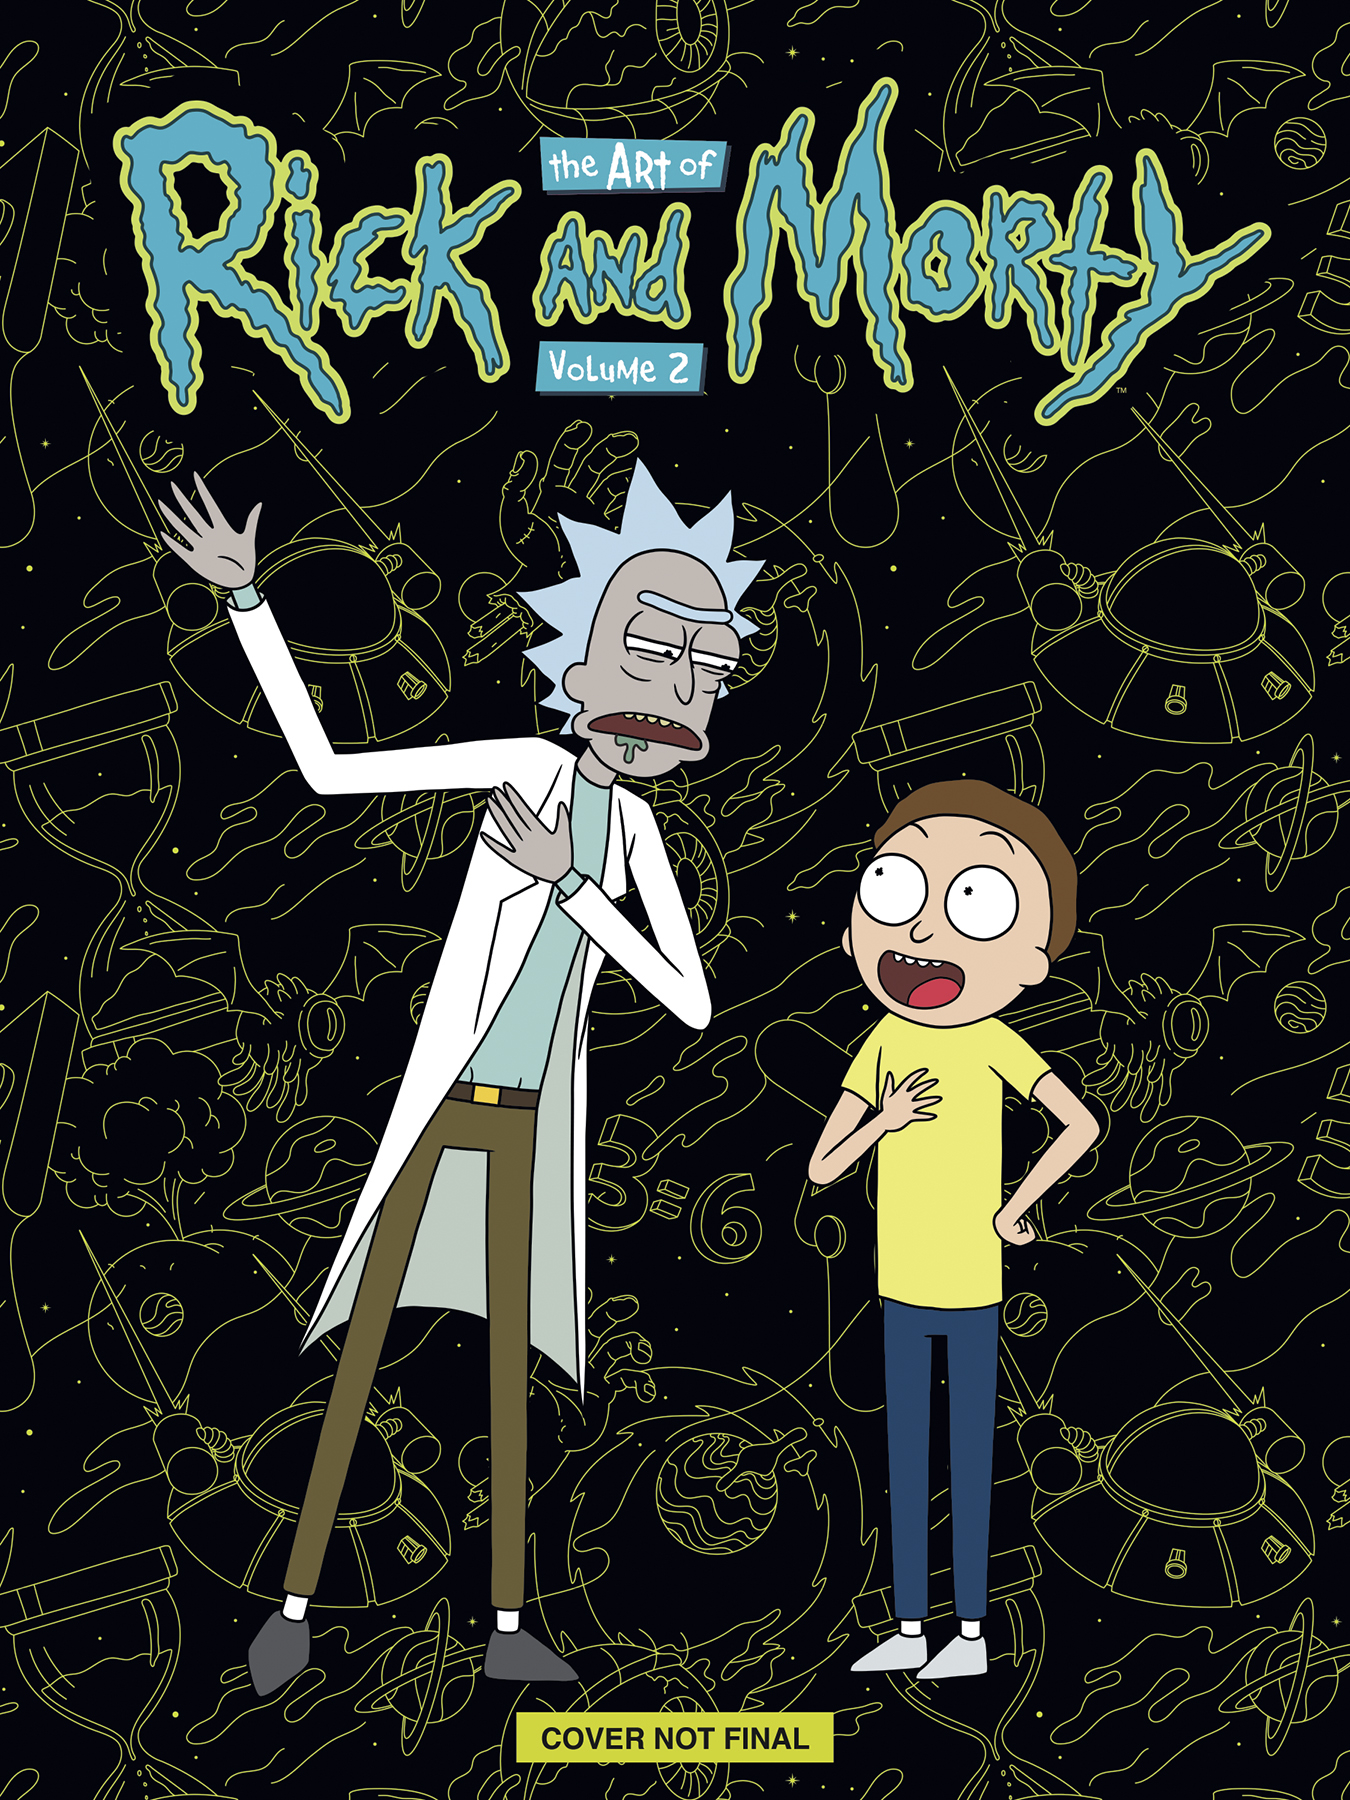 Art of Rick and Morty Hardcover Deluxe Edition Volume 2